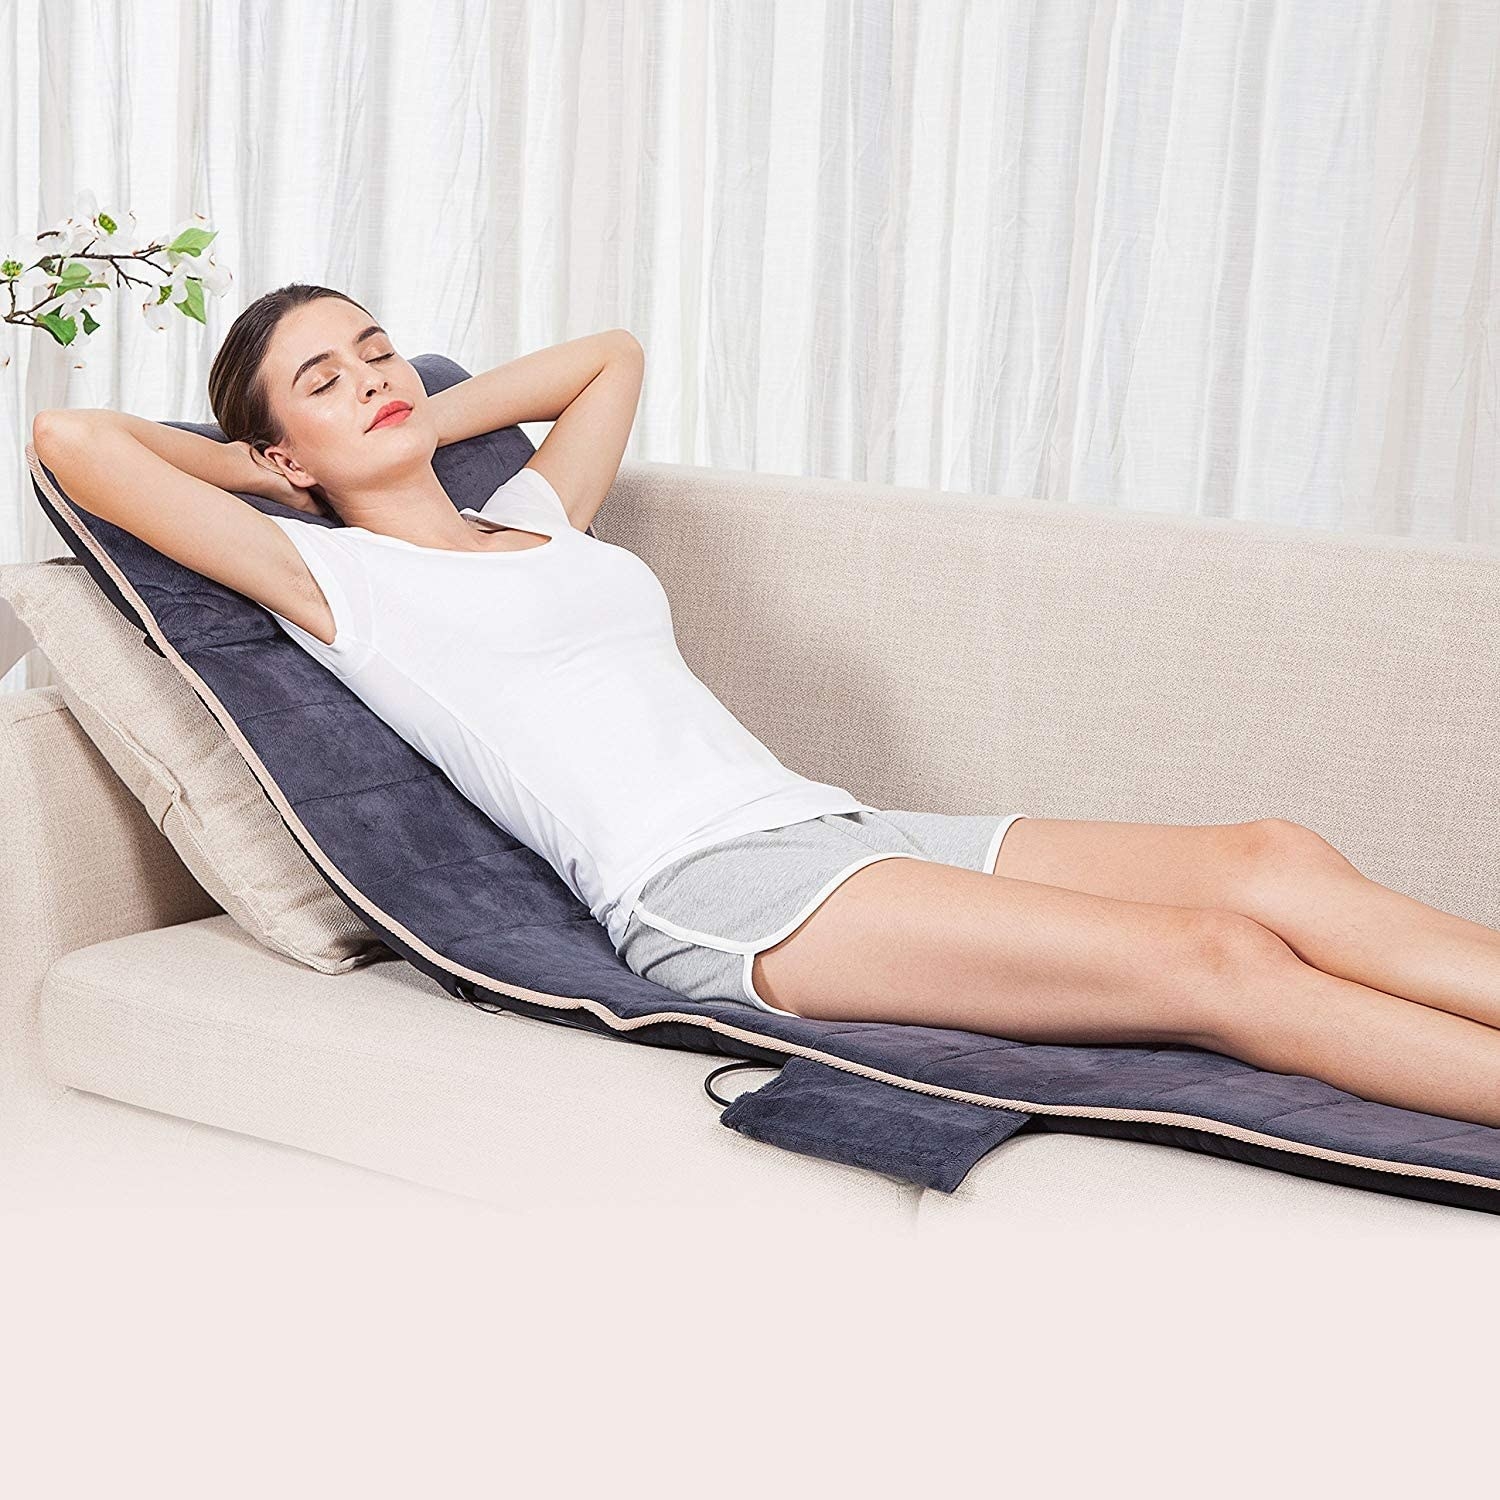 A person laying on the massager on a couch